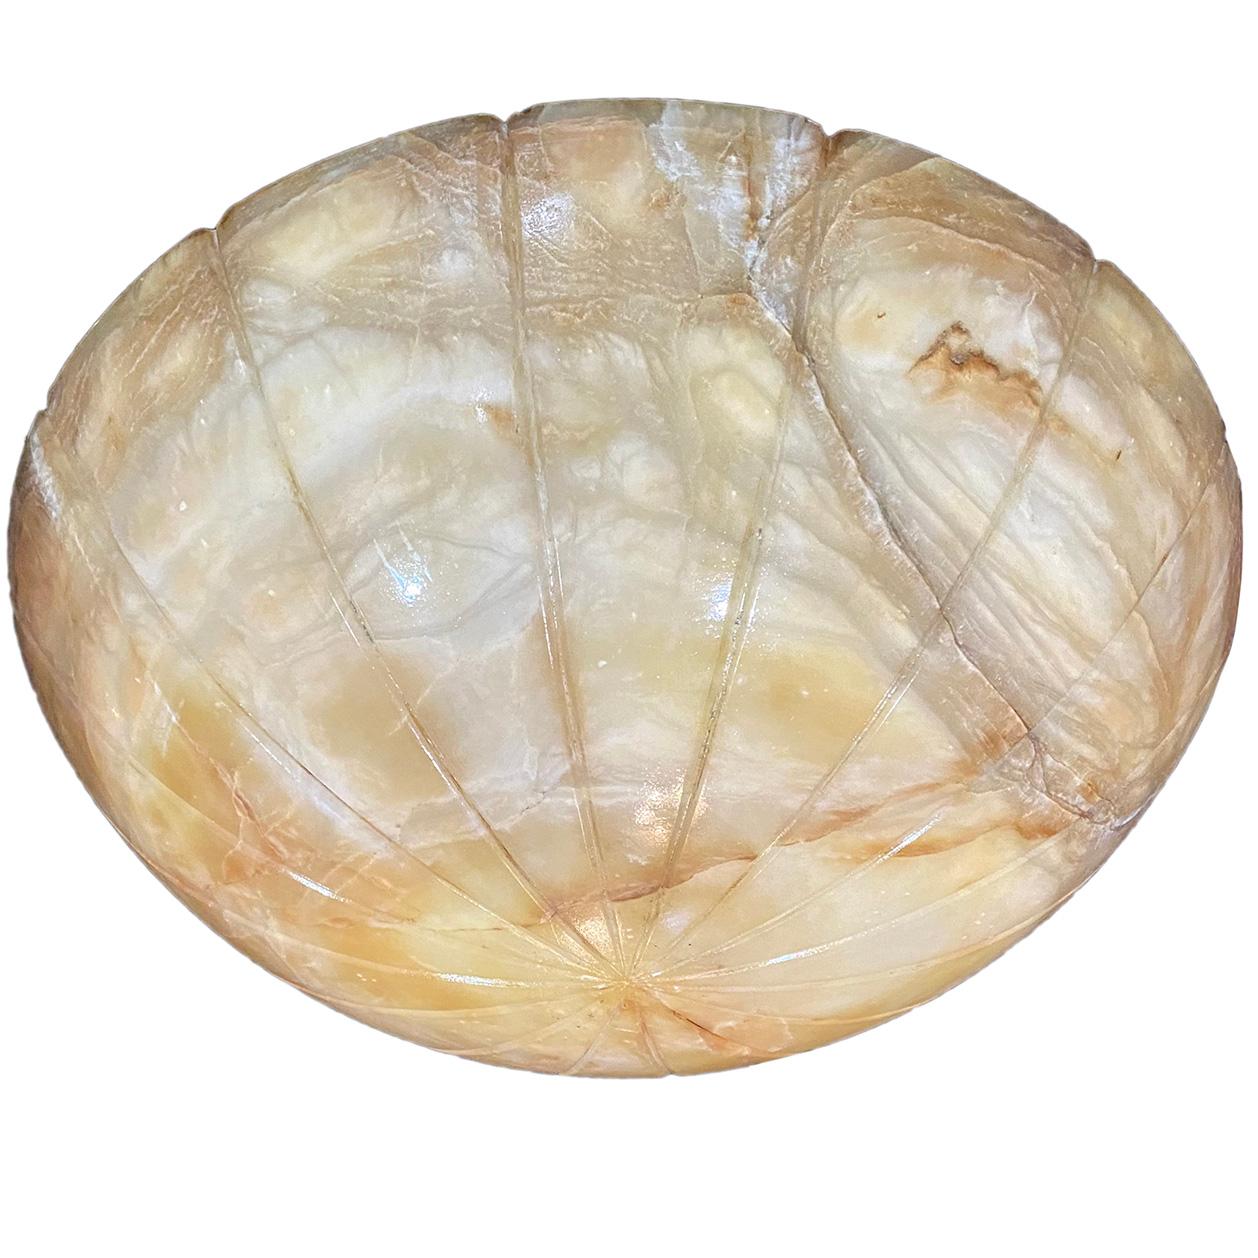 Large amber-colored French carved alabaster fixture with interior lights.

Measurements:
Drop 12